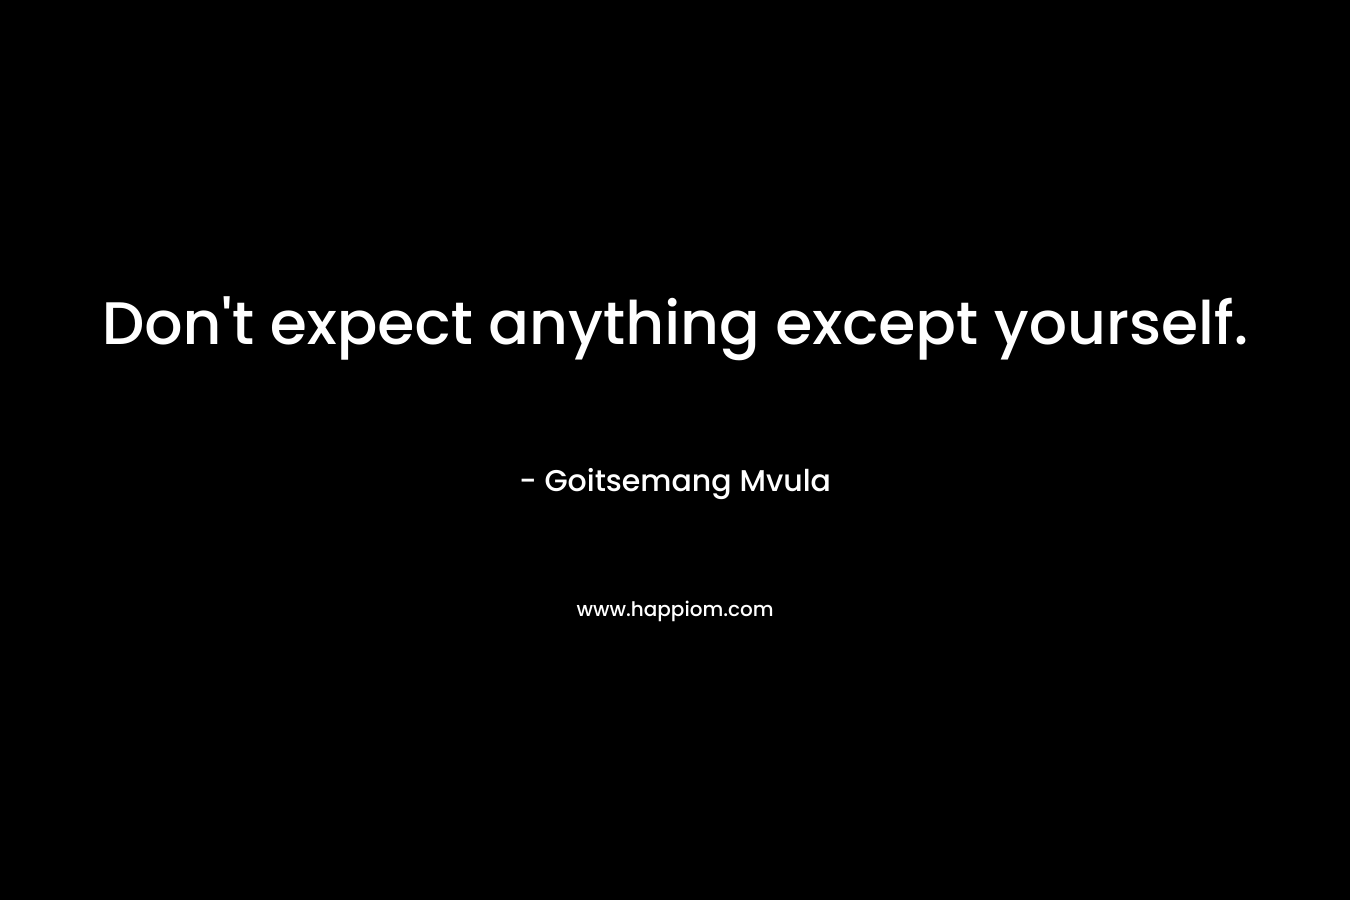 Don't expect anything except yourself.